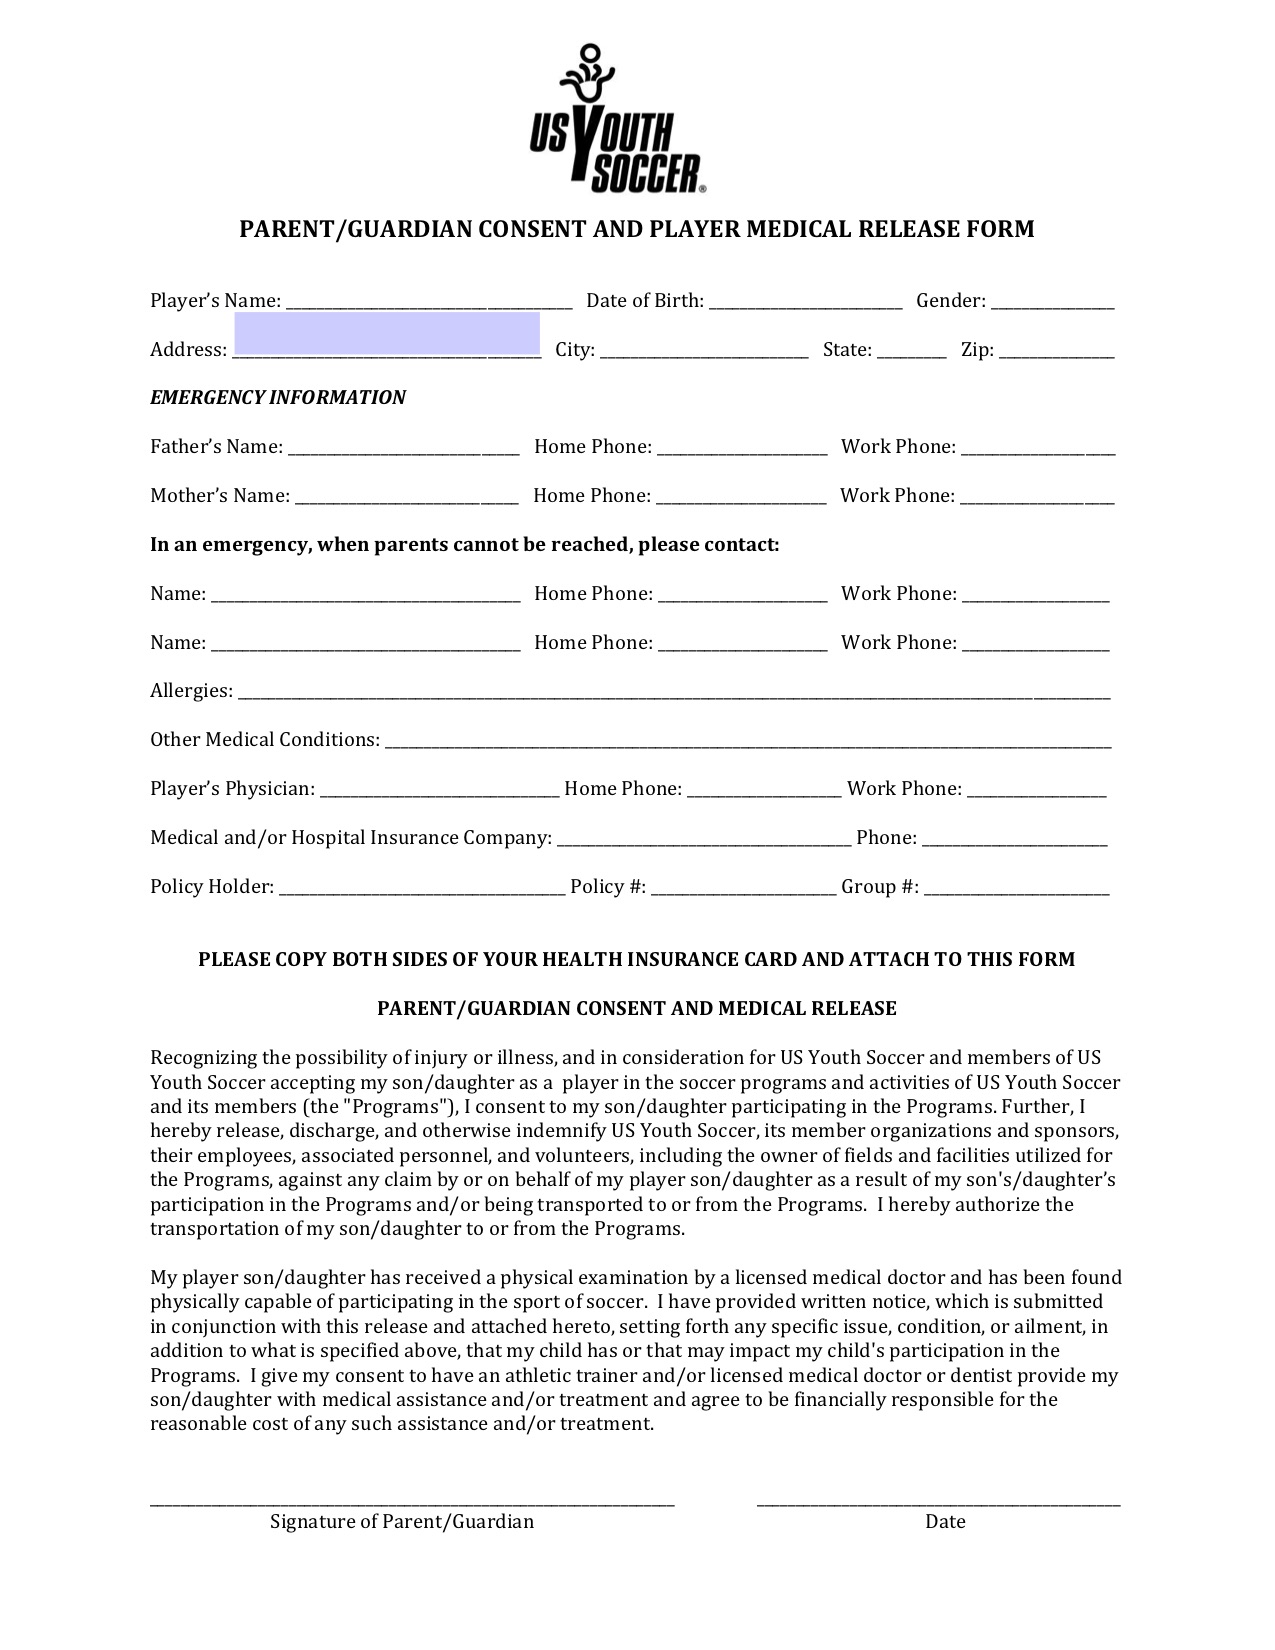 USYS Medical release form